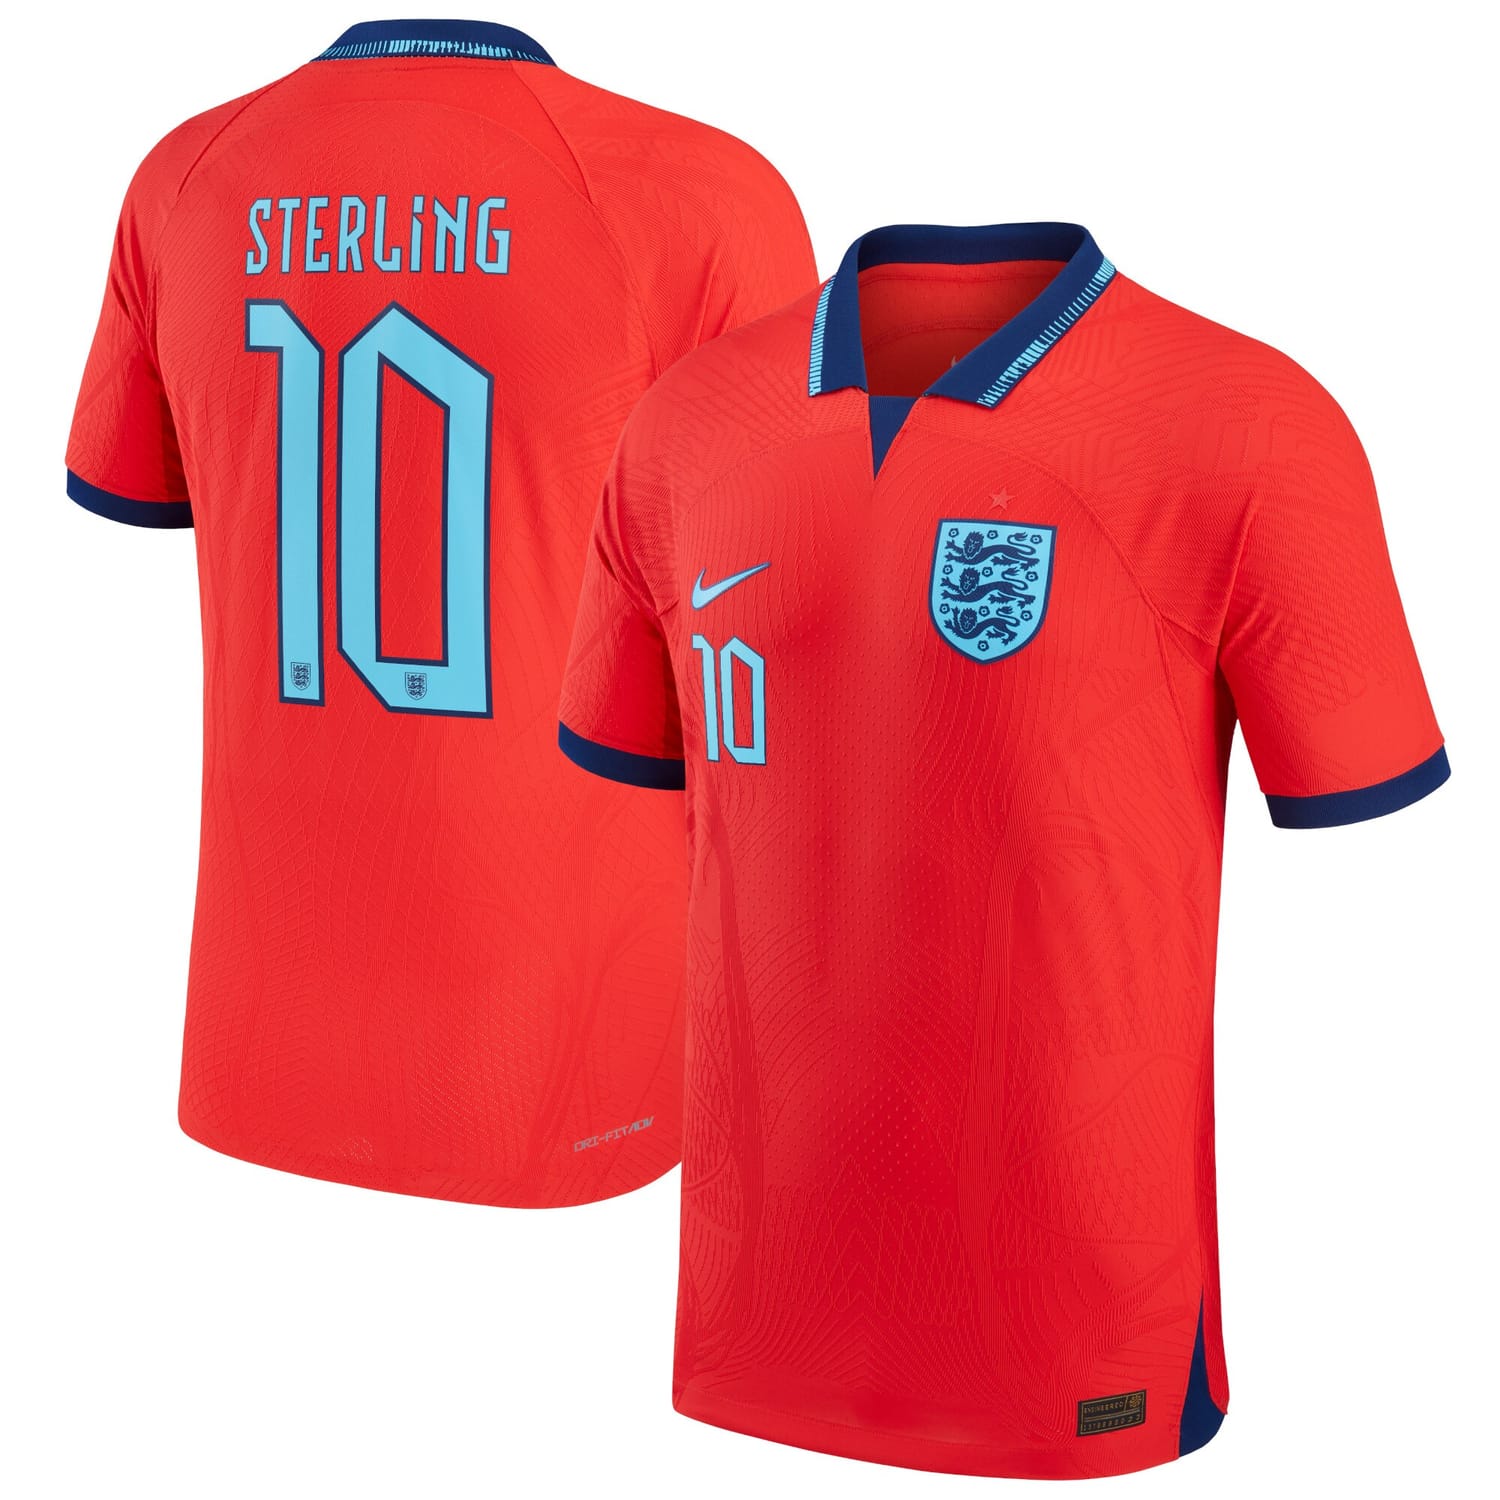 England National Team Away Authentic Jersey Shirt 2022 player Raheem Sterling 10 printing for Men